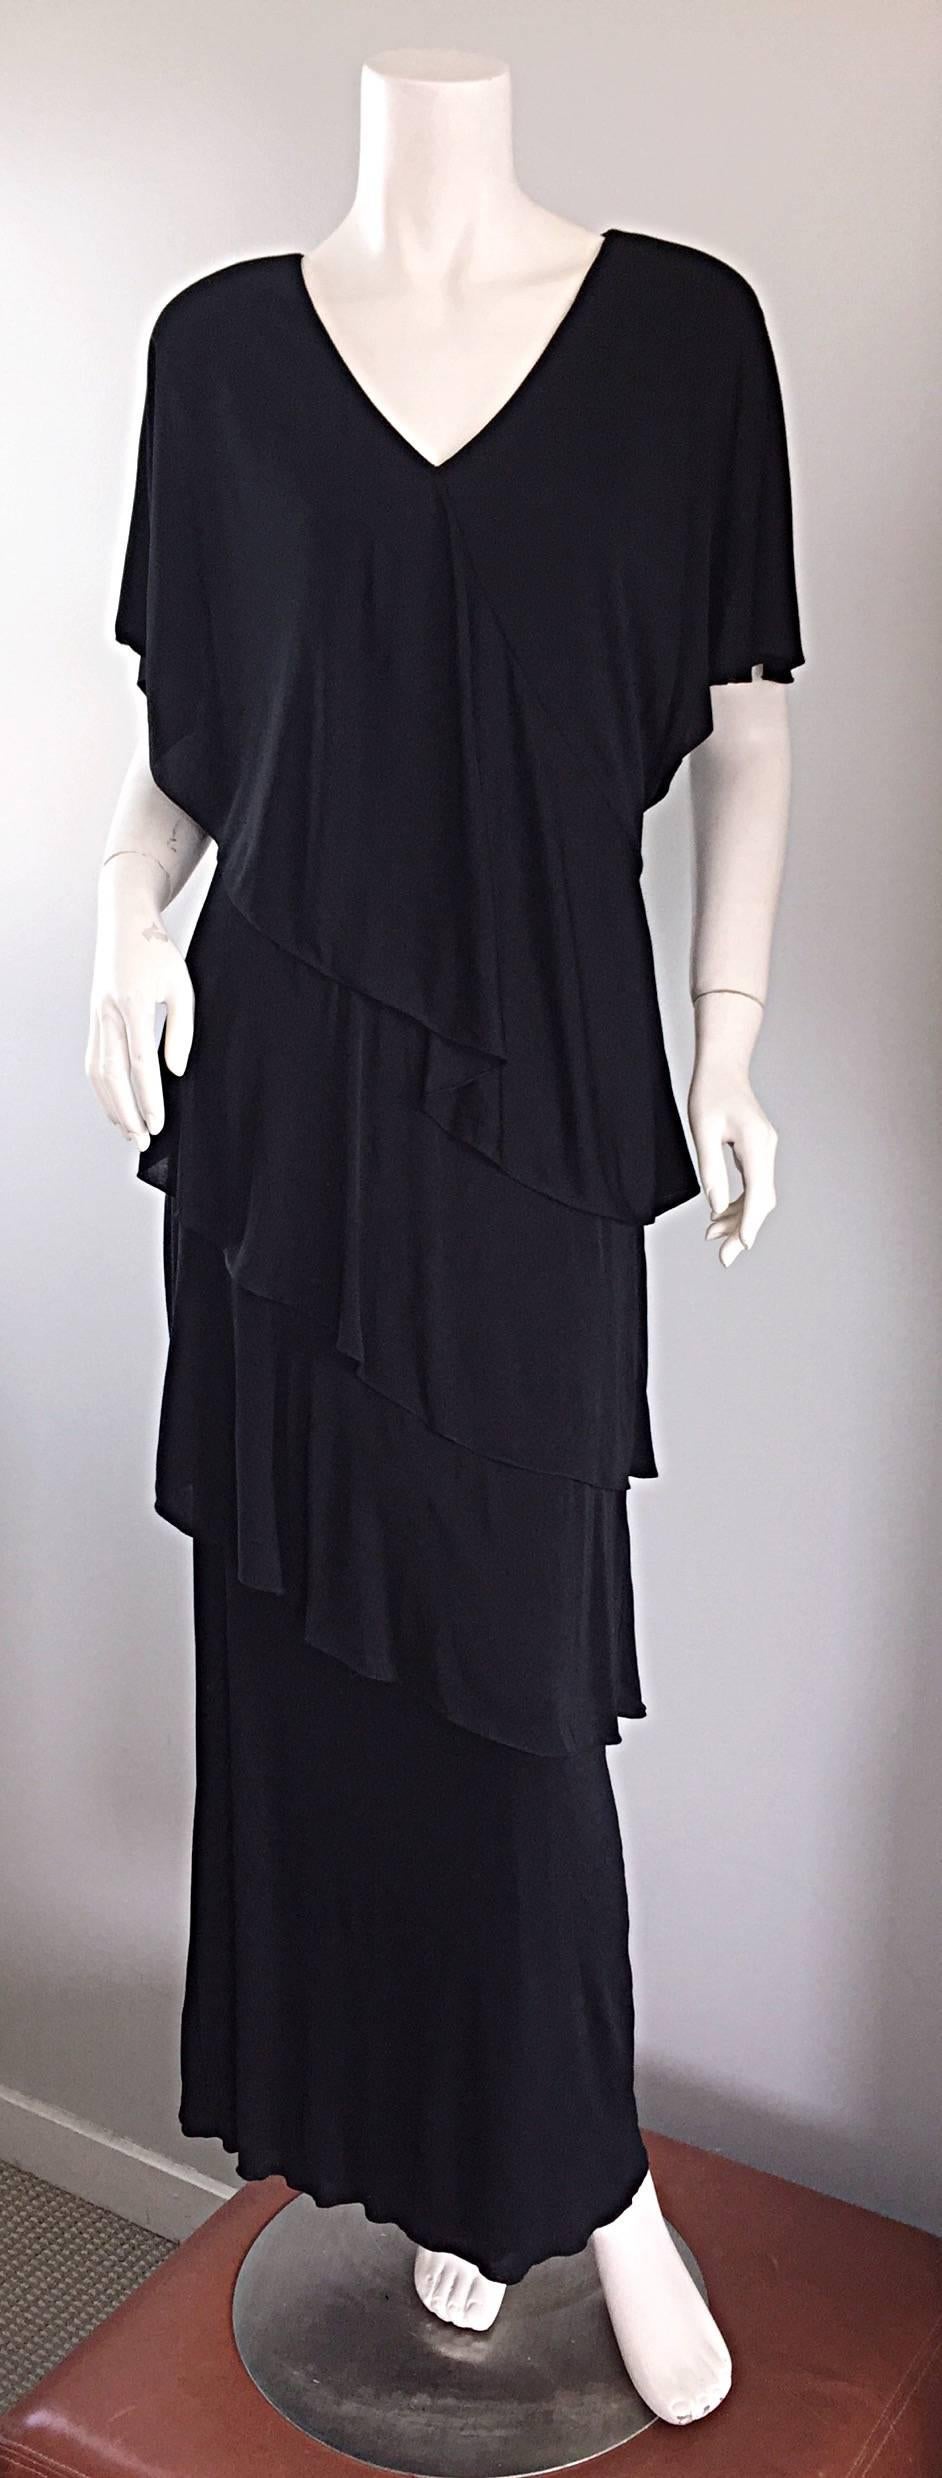 Vintage Holly's Harp Black Silk Jersey Signature Tiered Layered Boho Dress Gown 5